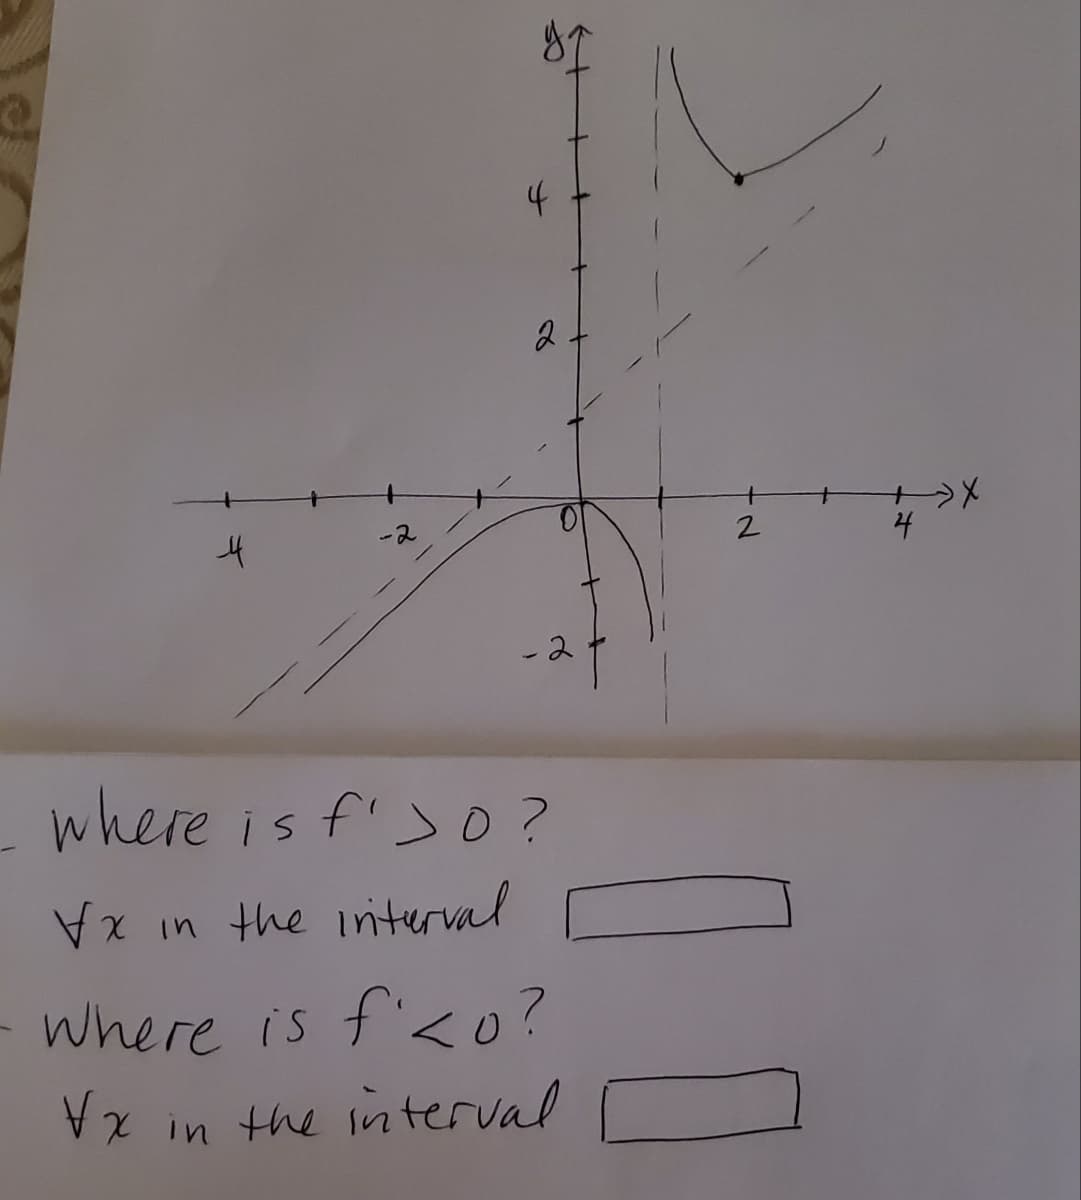 87
2
-2
4
-2
where is f'>o ?
xin the interval
Where is f'<O?
Vx in the interval
N.
